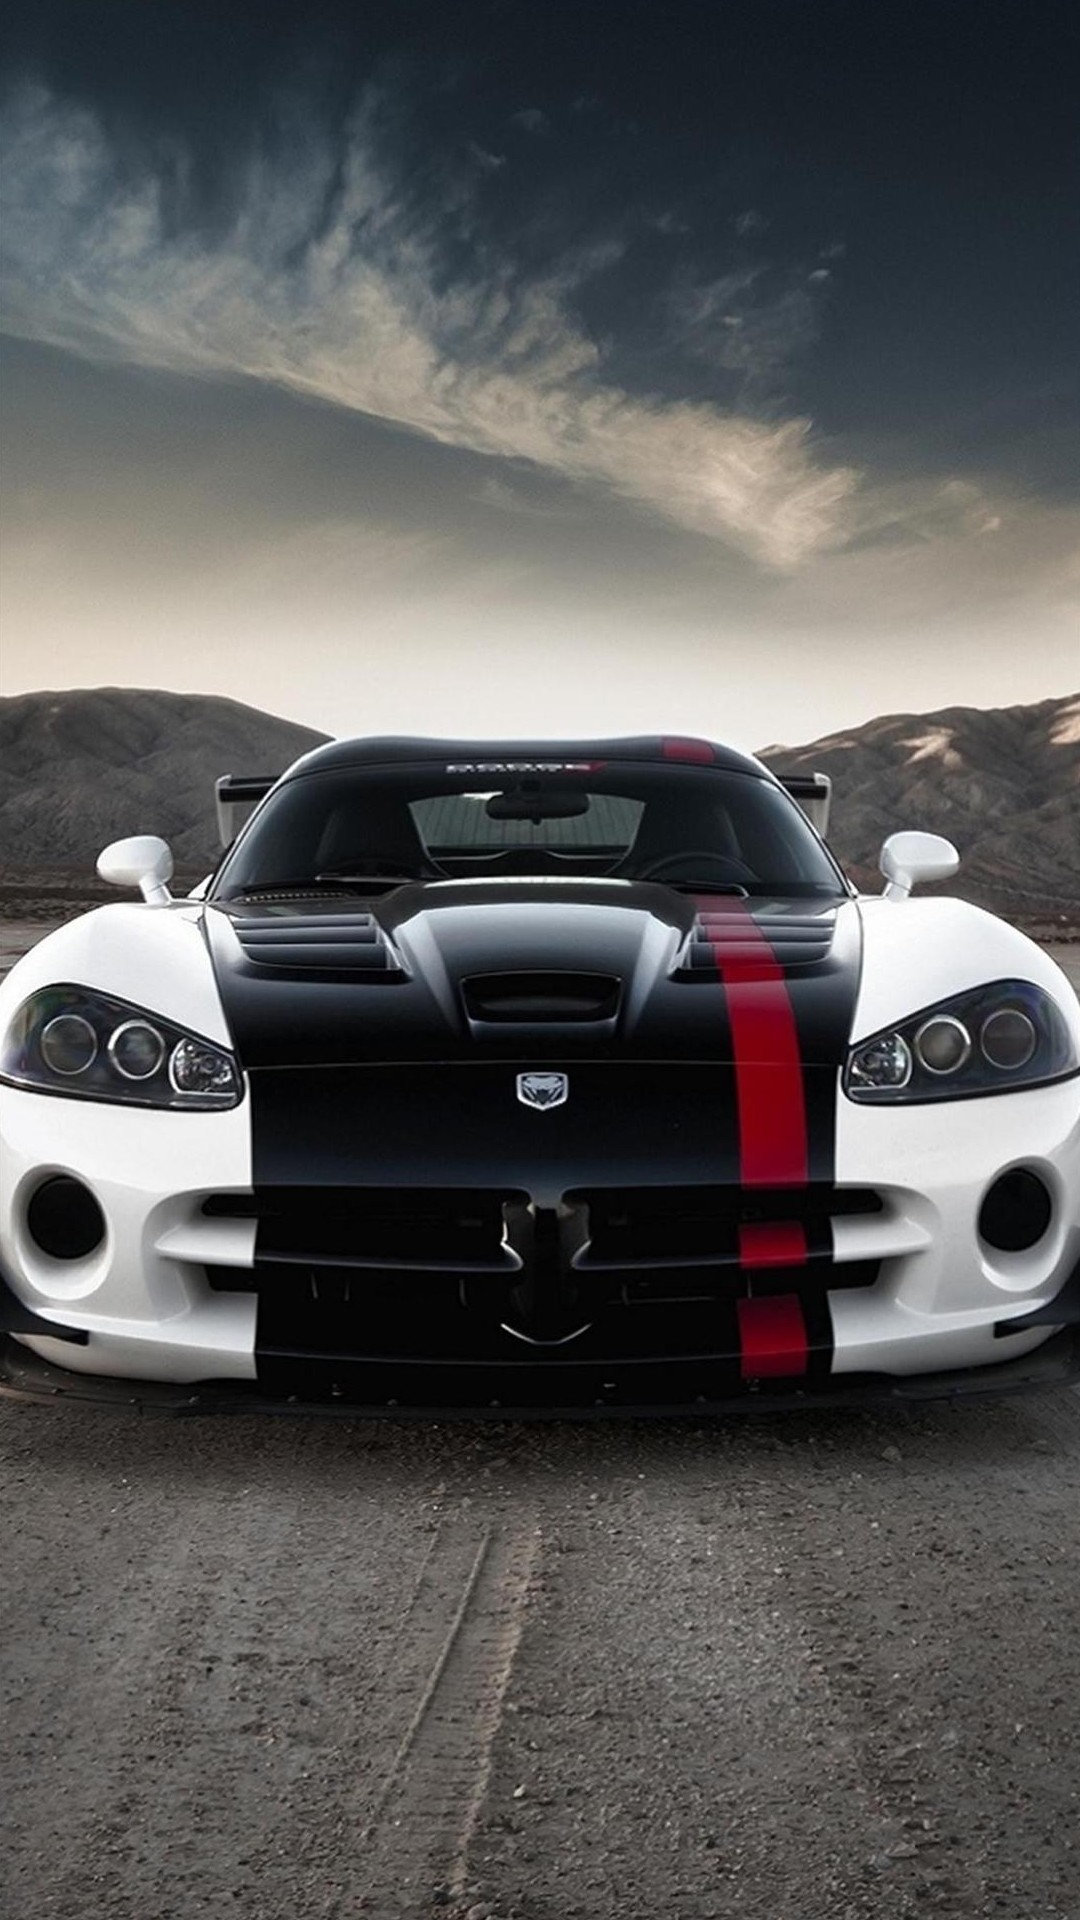 Dodge Viper Best Htc One Wallpaper And Easy To